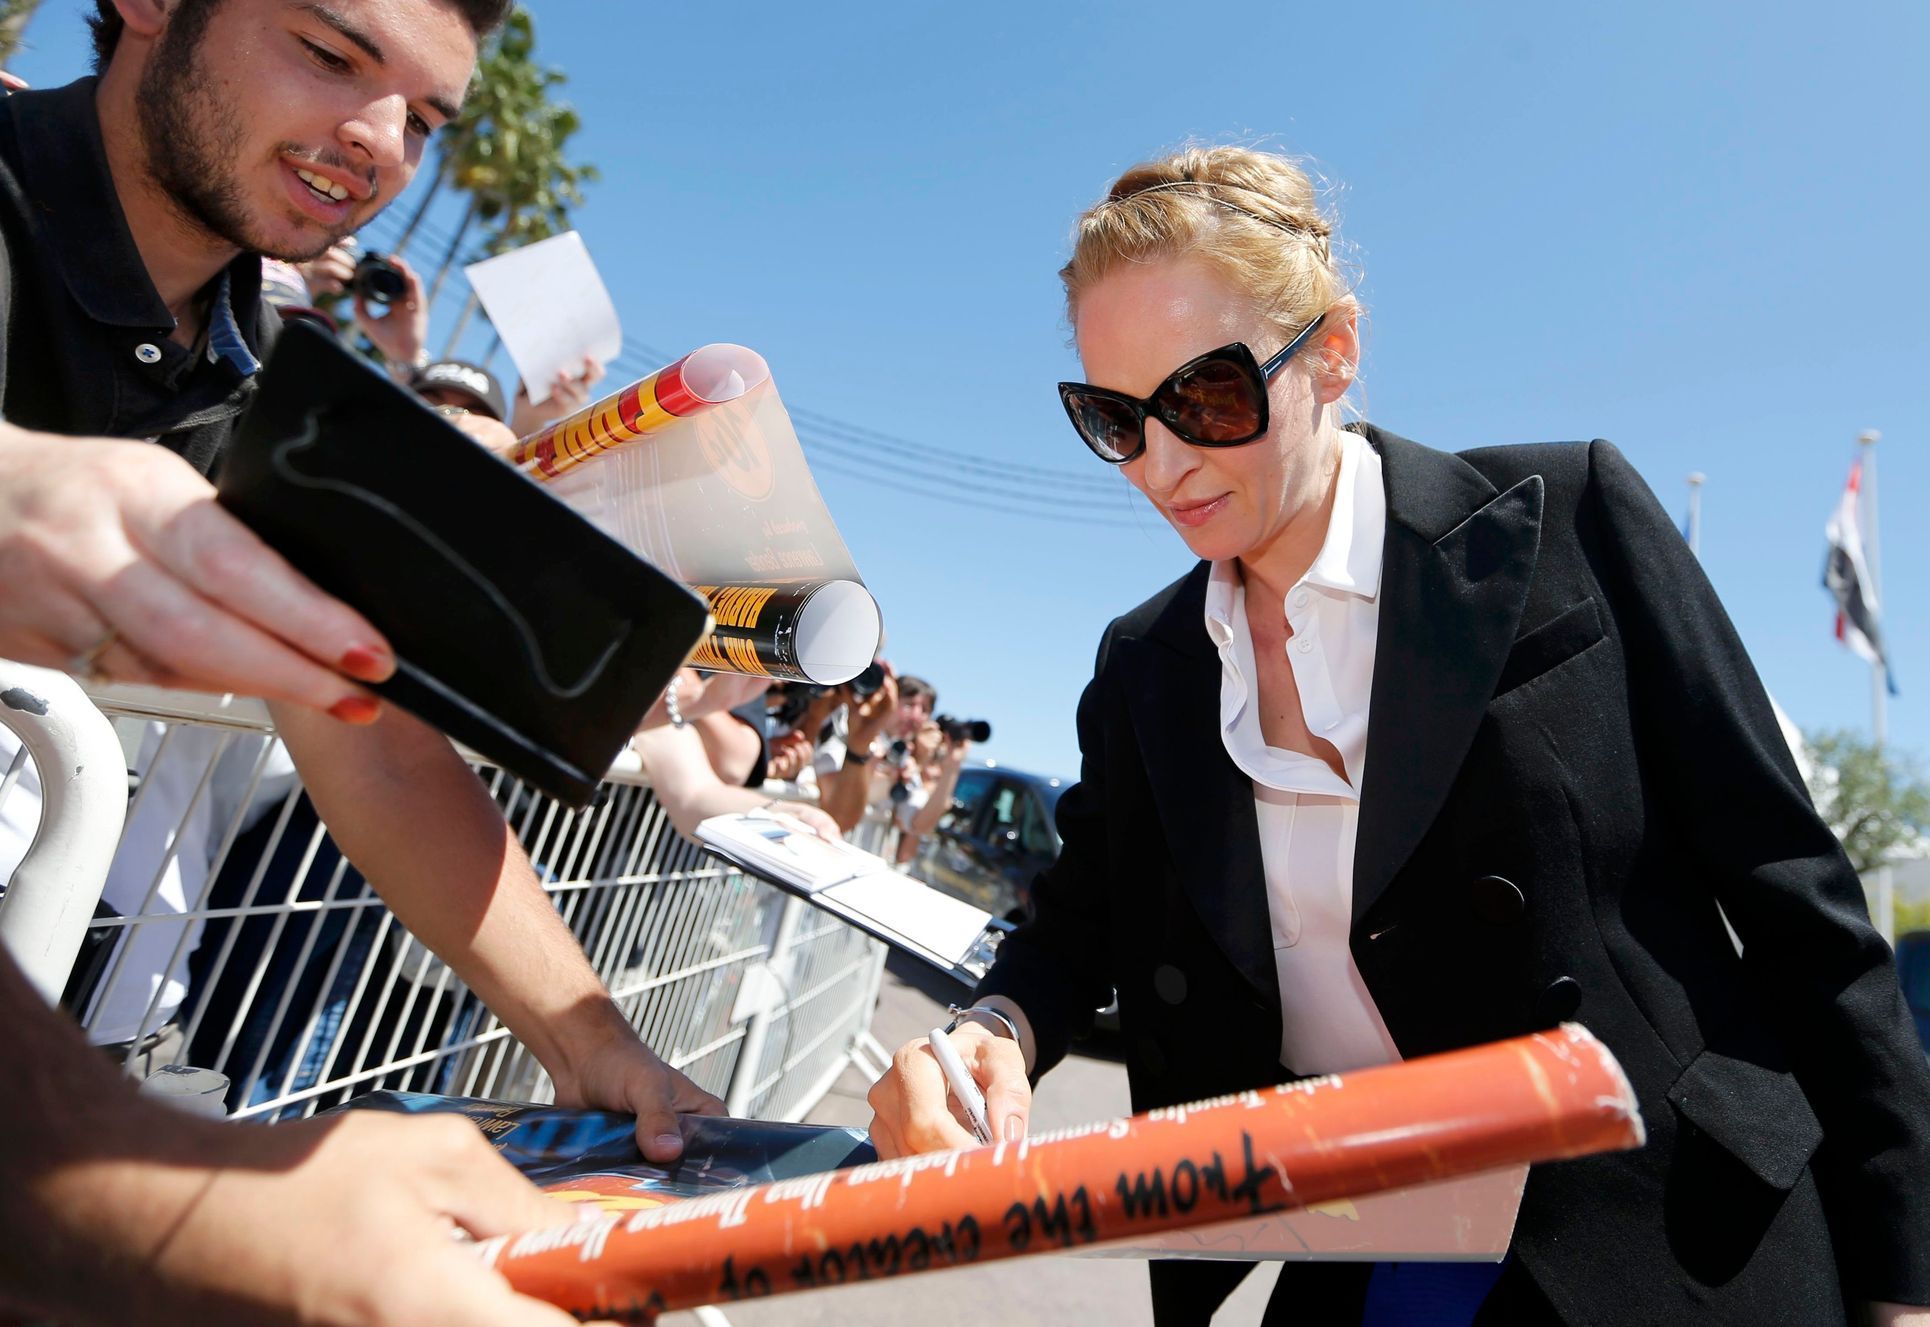 Actress Uma Thurman signs autographs to cinema fans on the Croisette during the 67th Cannes Film Festival in Cannes